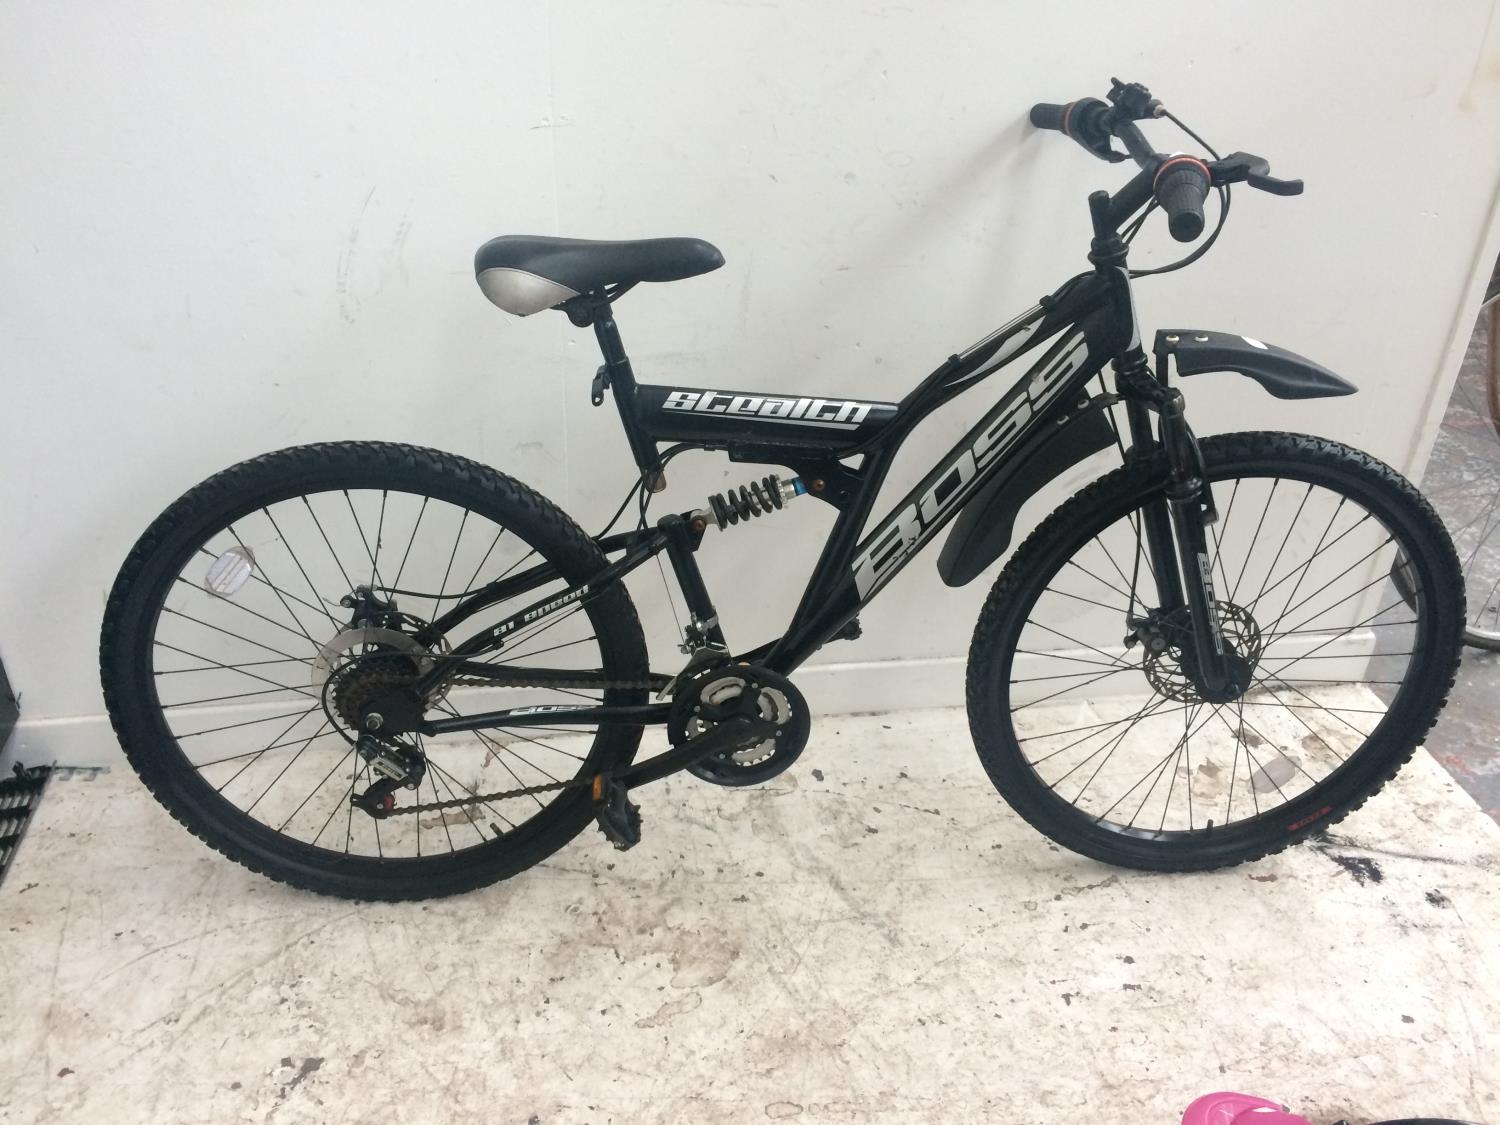 BLACK BOSS STEALTH DUAL SUSPENSION MOUNTAIN BIKE WITH TWIN DISC FRONT WHEEL